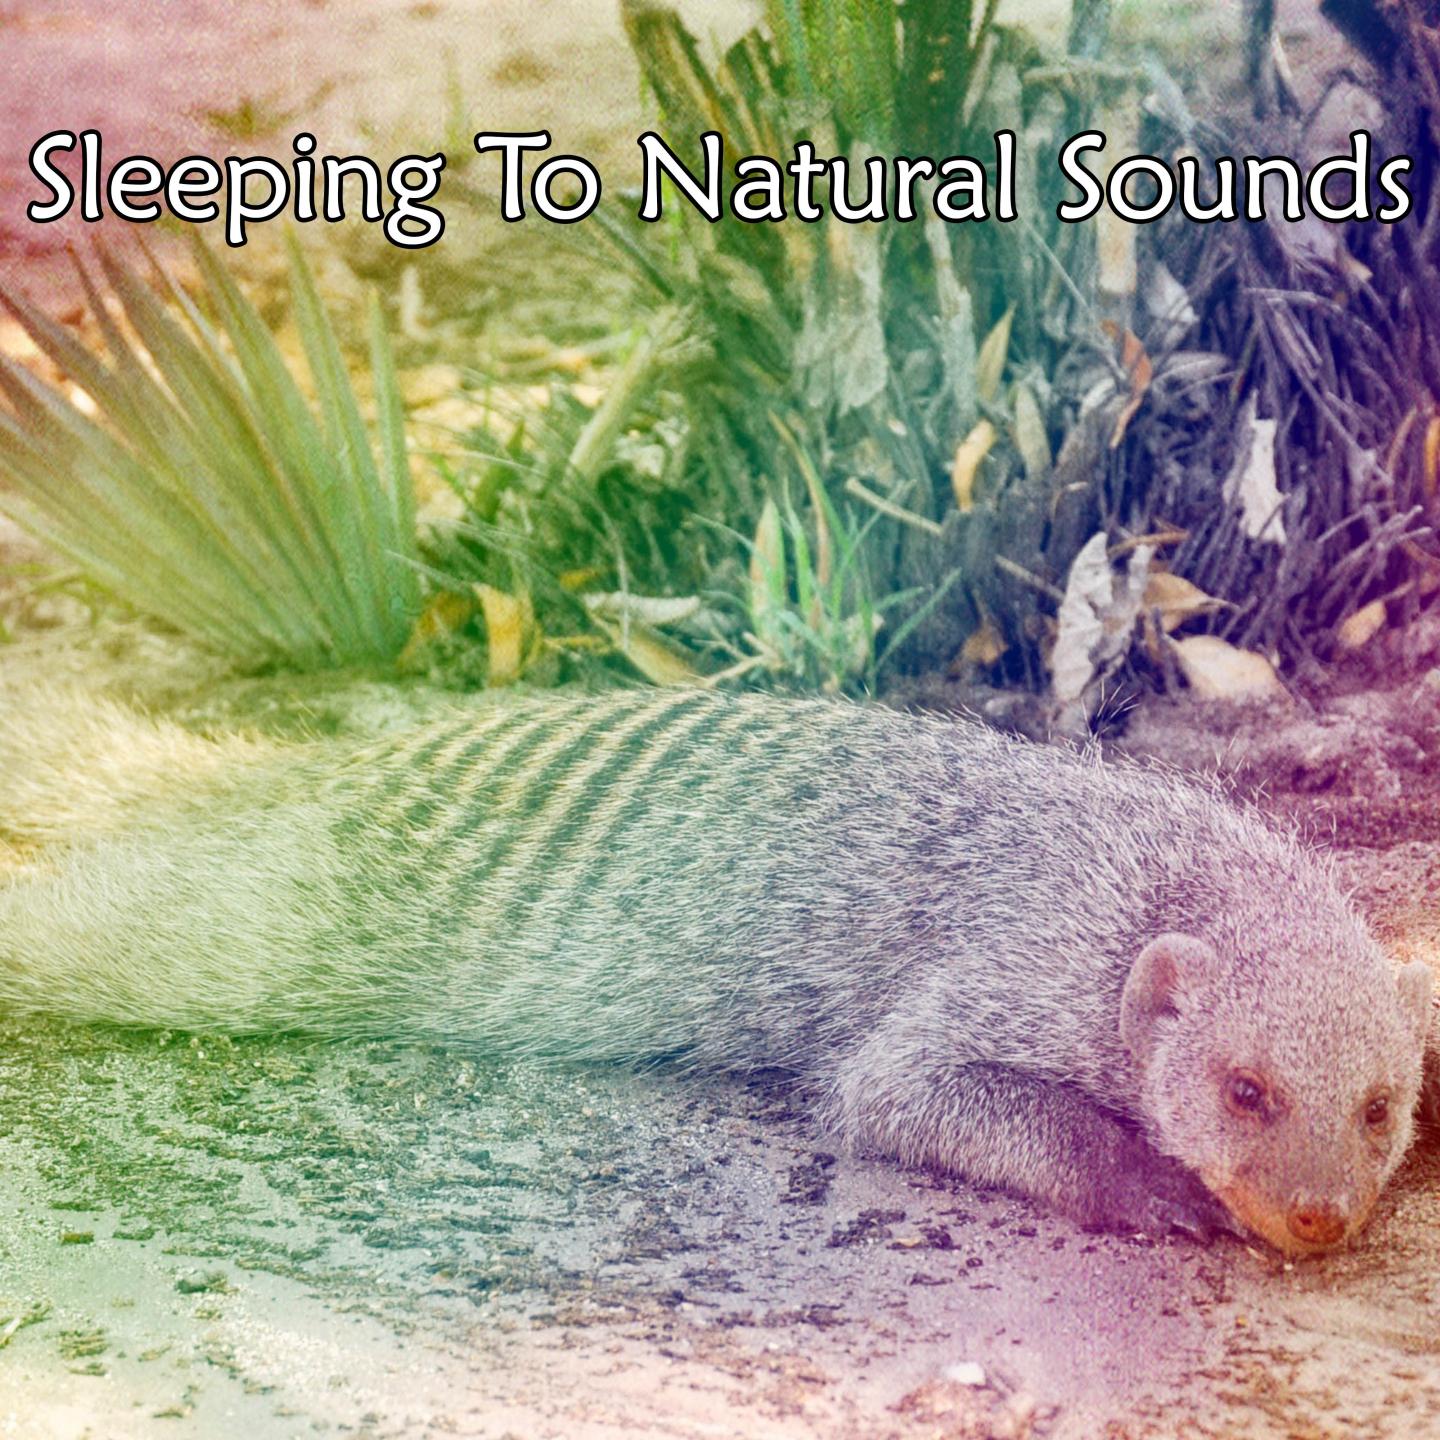 Sleeping To Natural Sounds